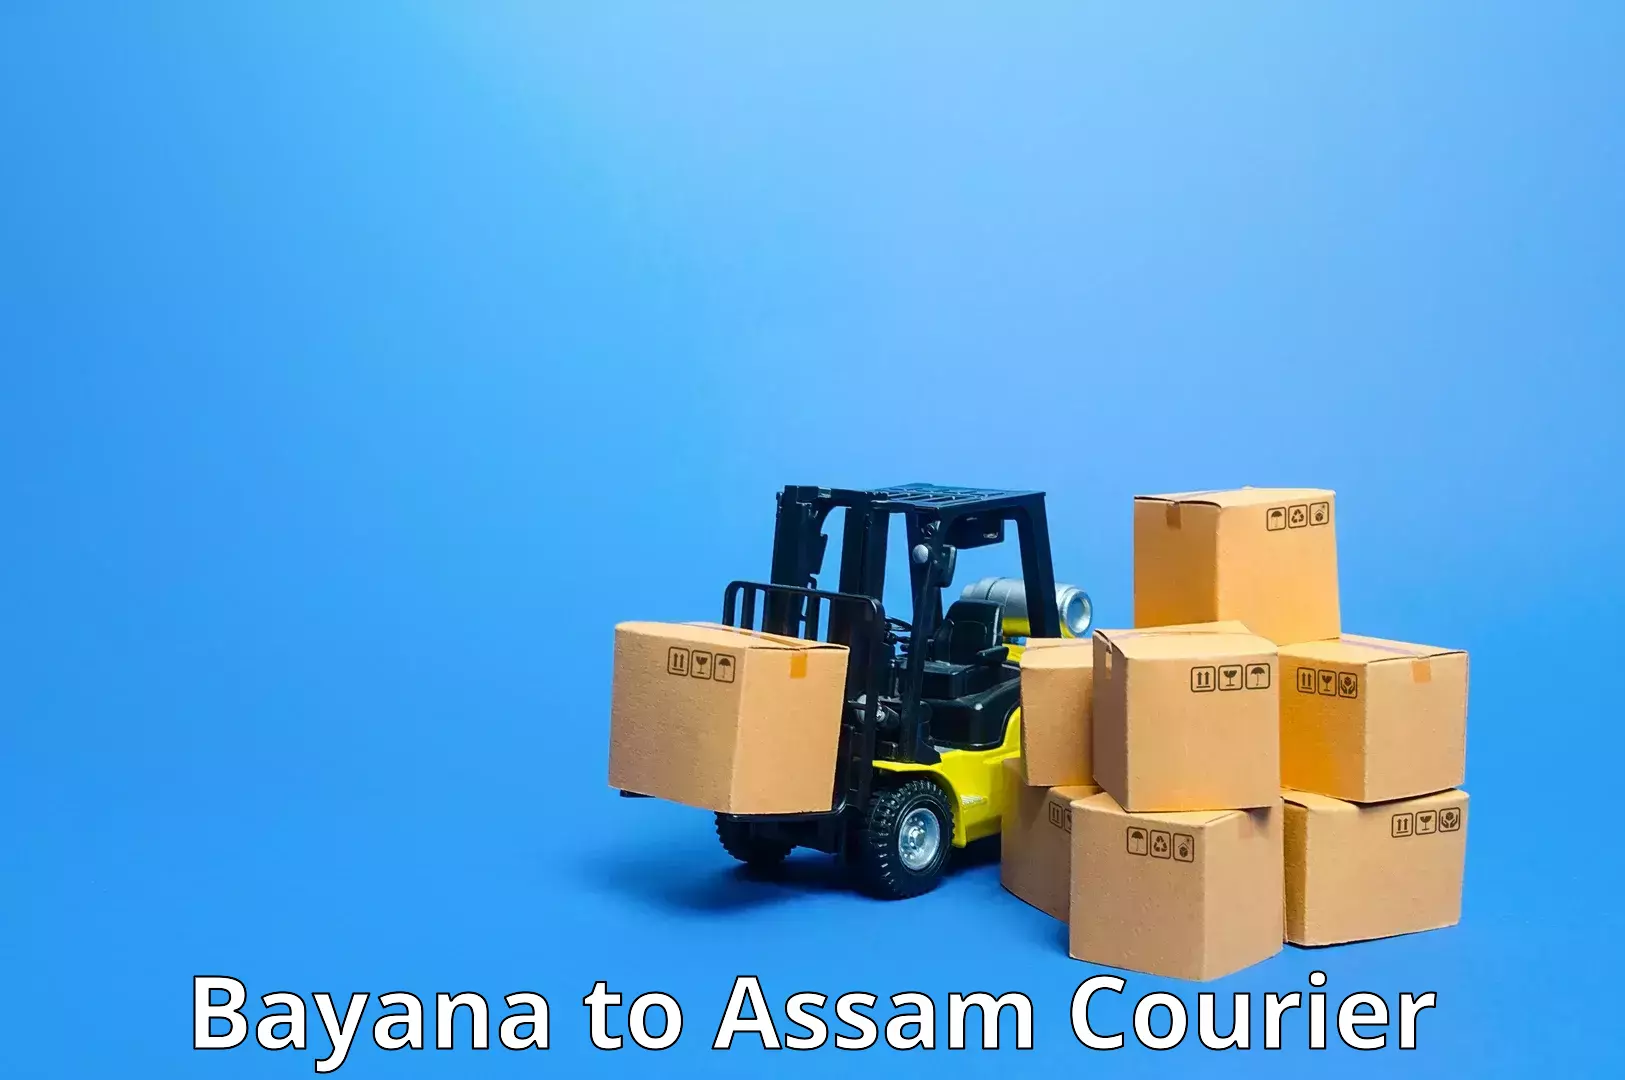 Seamless shipping experience in Bayana to Karbi Anglong